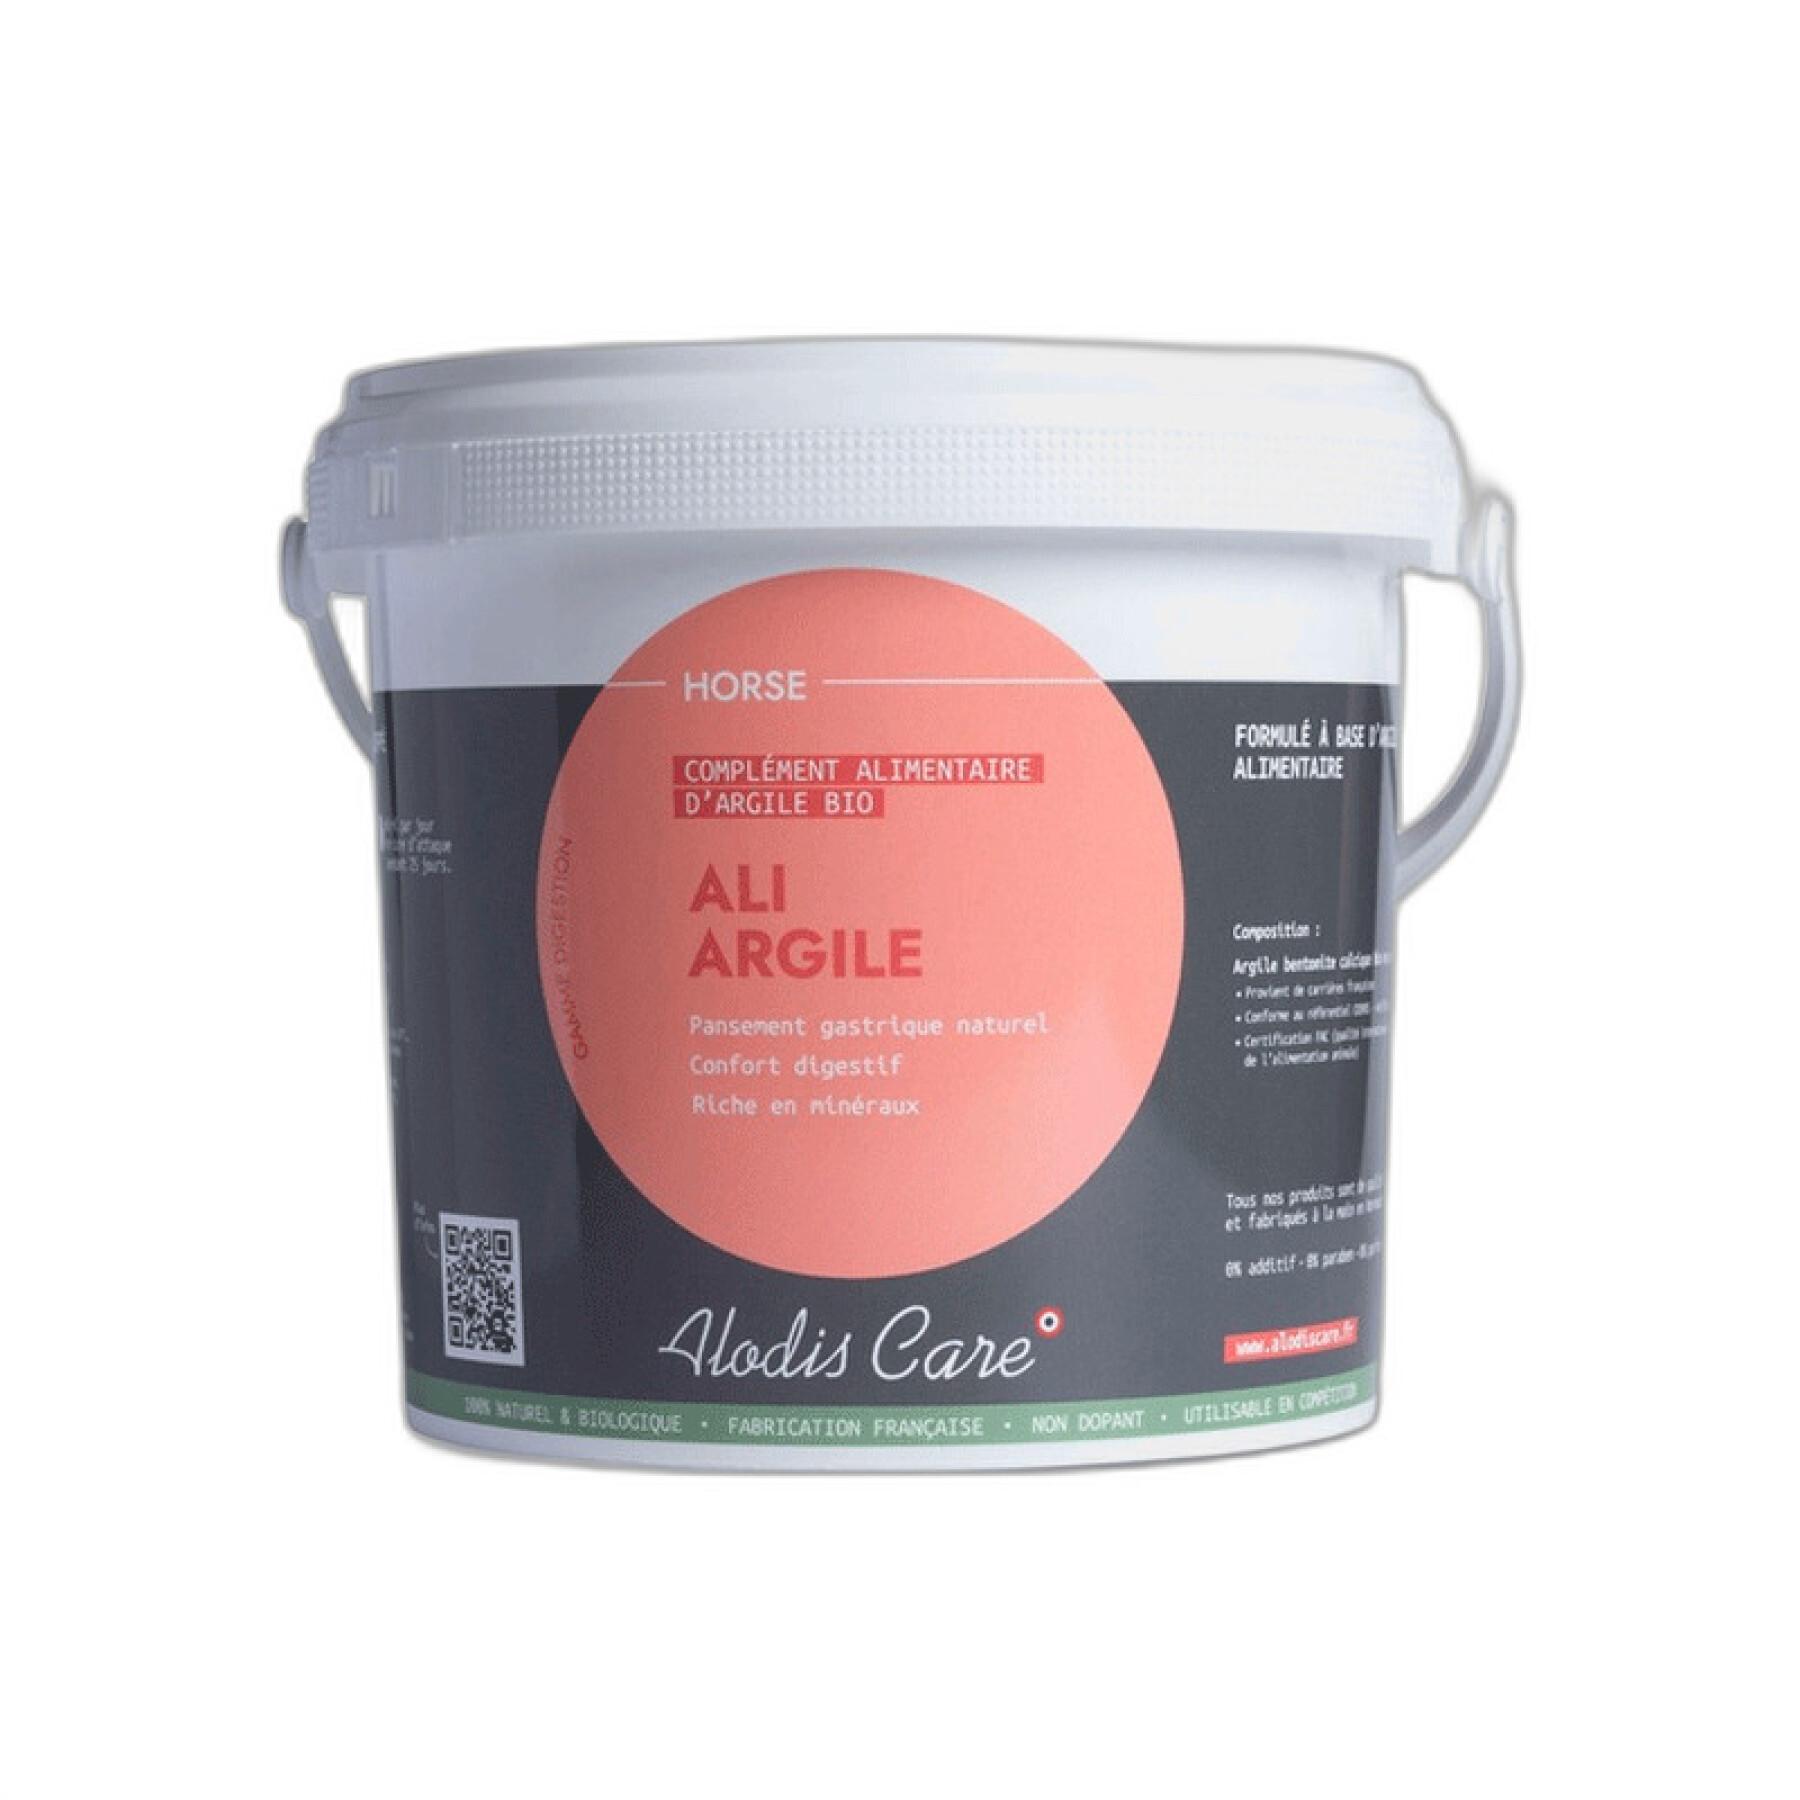 Mineral and digestive supplement for horses Alodis Care Ali Argile